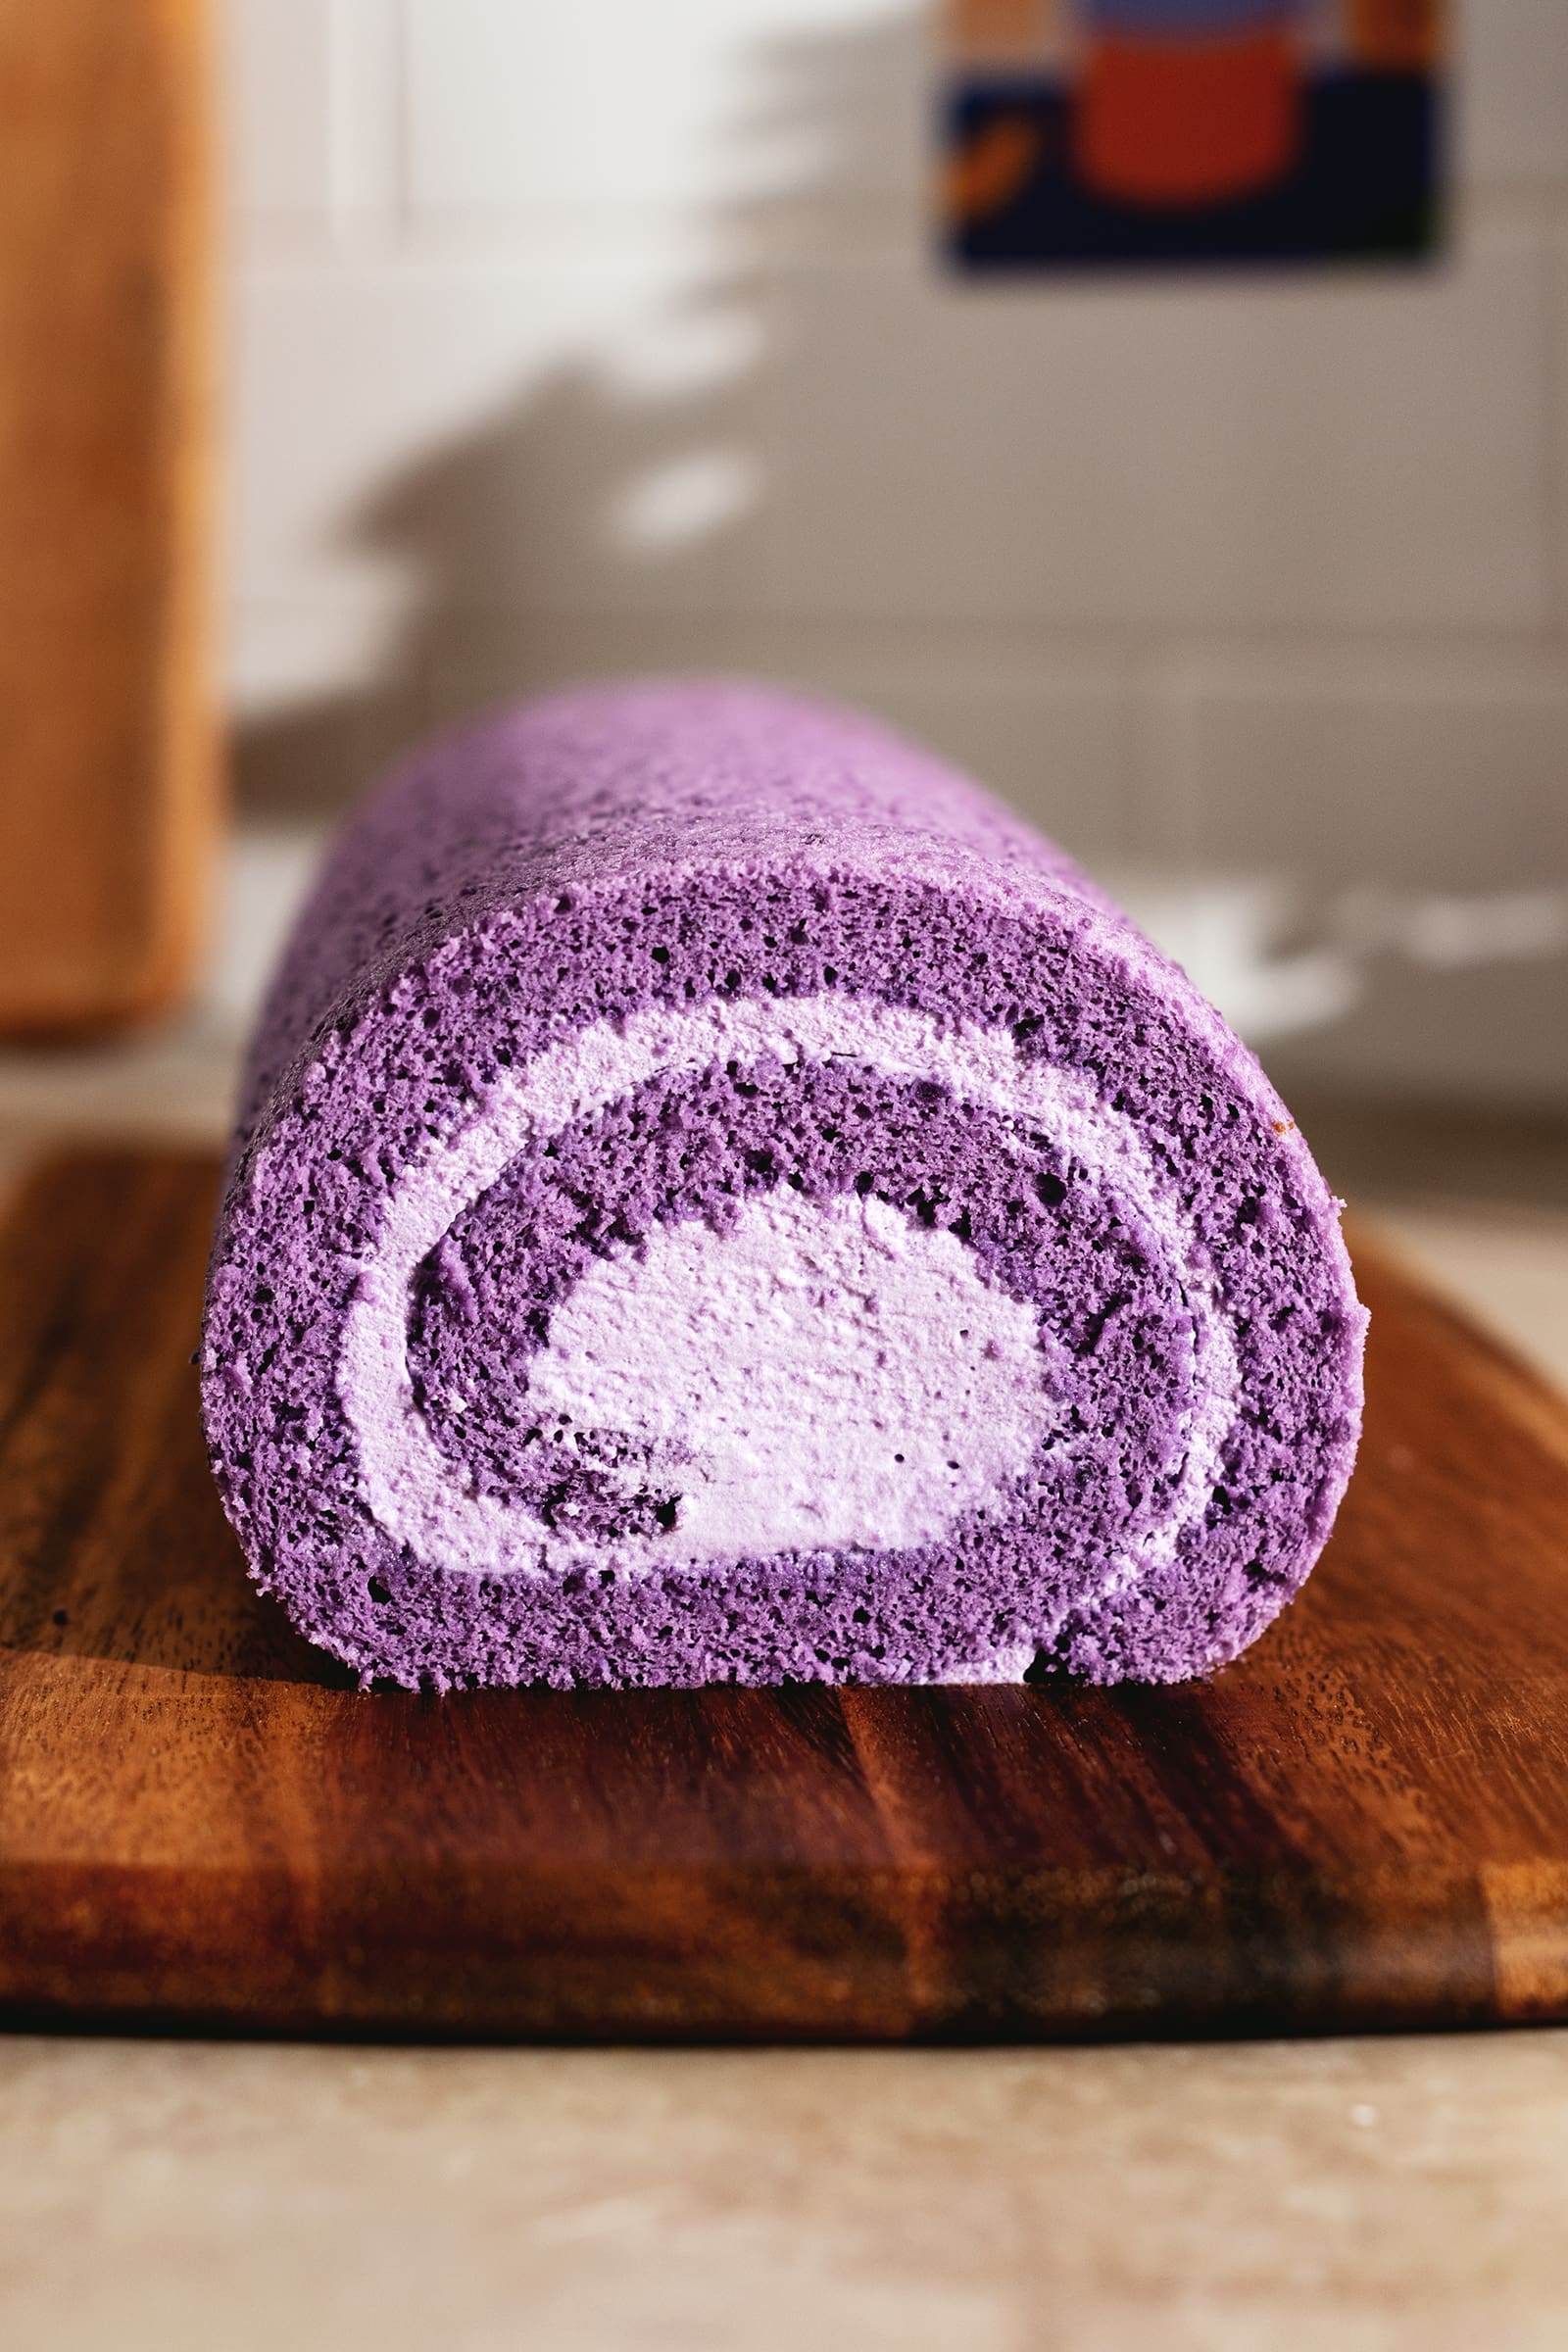 Cross section view of a purple ube roll cake on a wooden board.